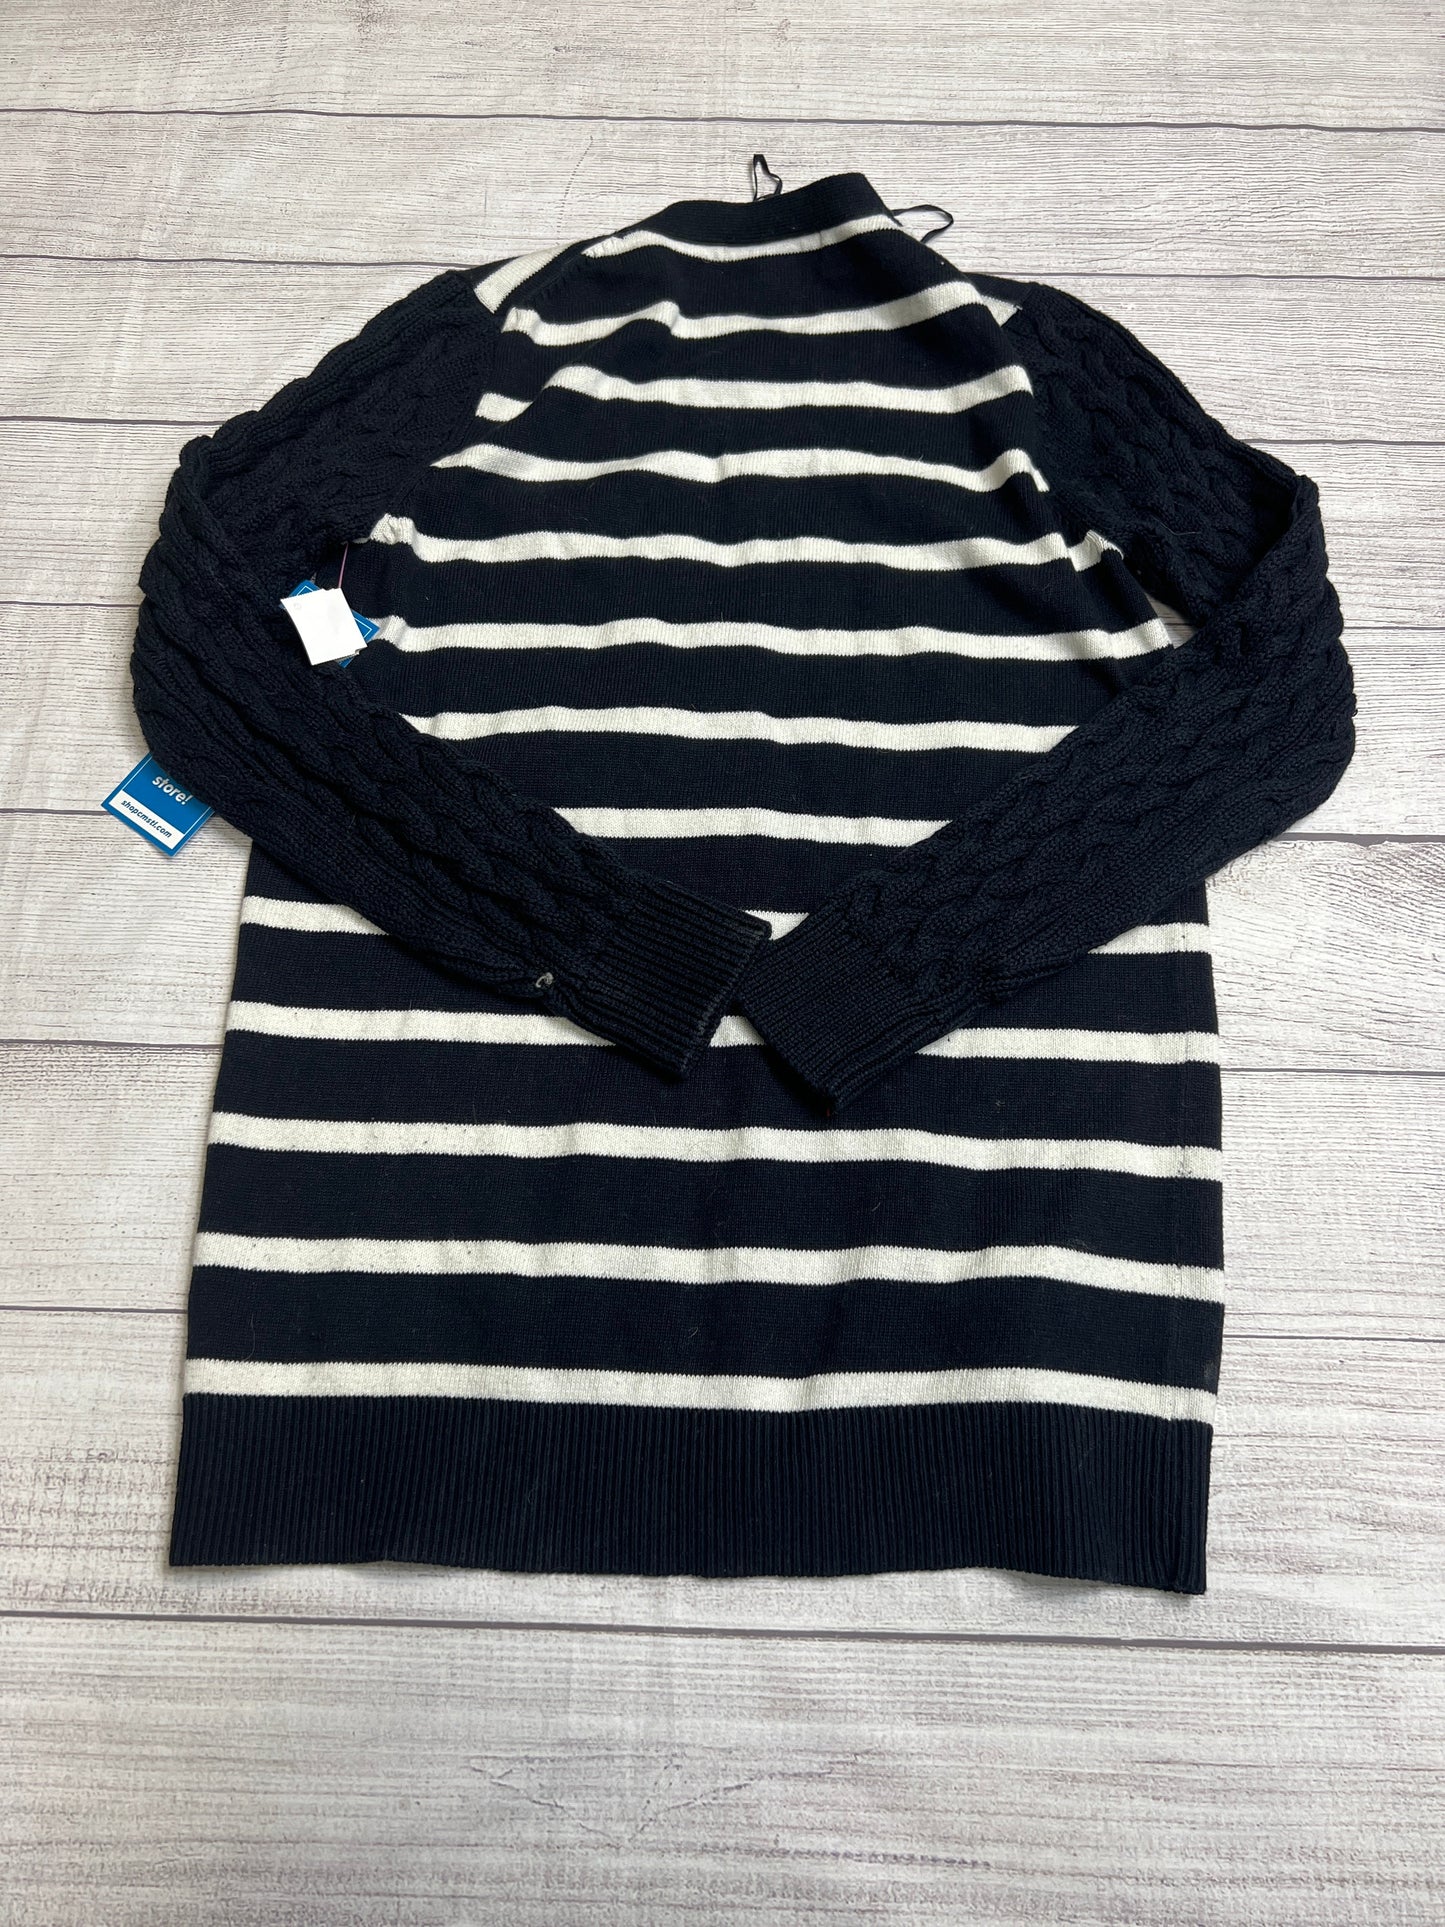 Cardigan By Michael Kors  Size: S